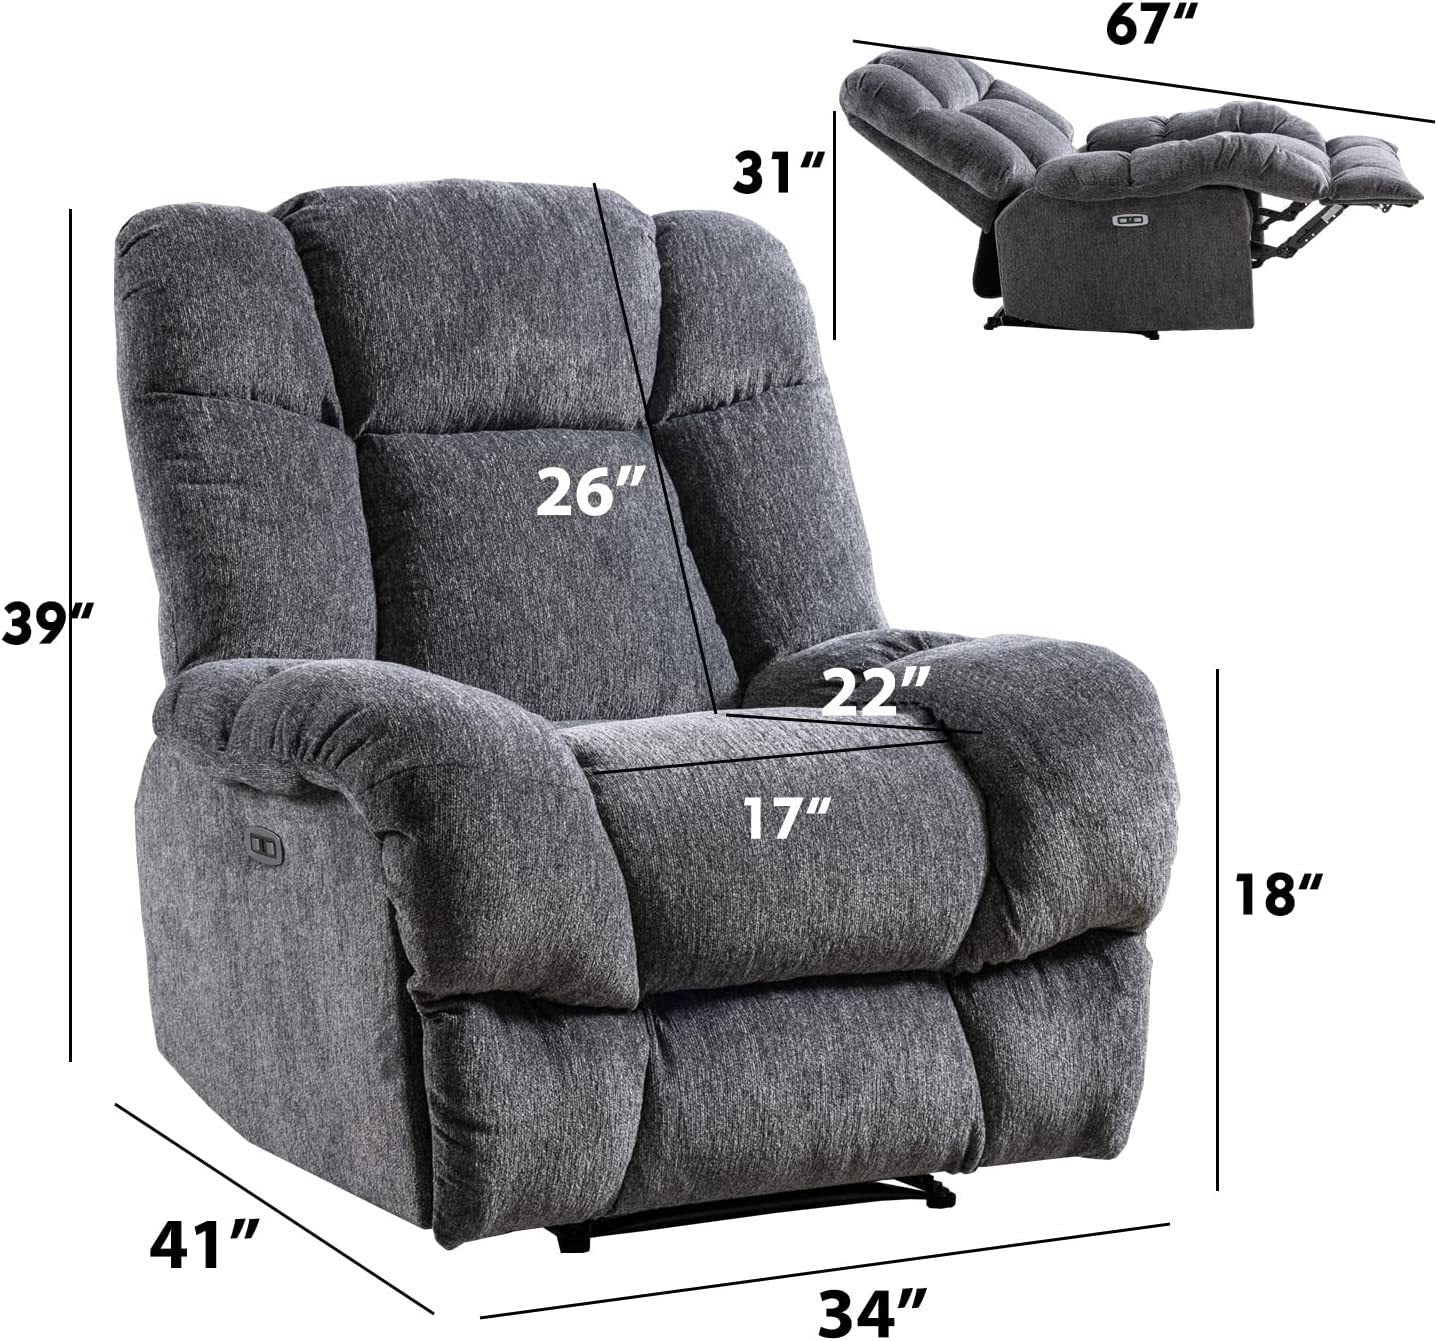 Dark Grey Electric Power Recliner Chair with USB Charge Port